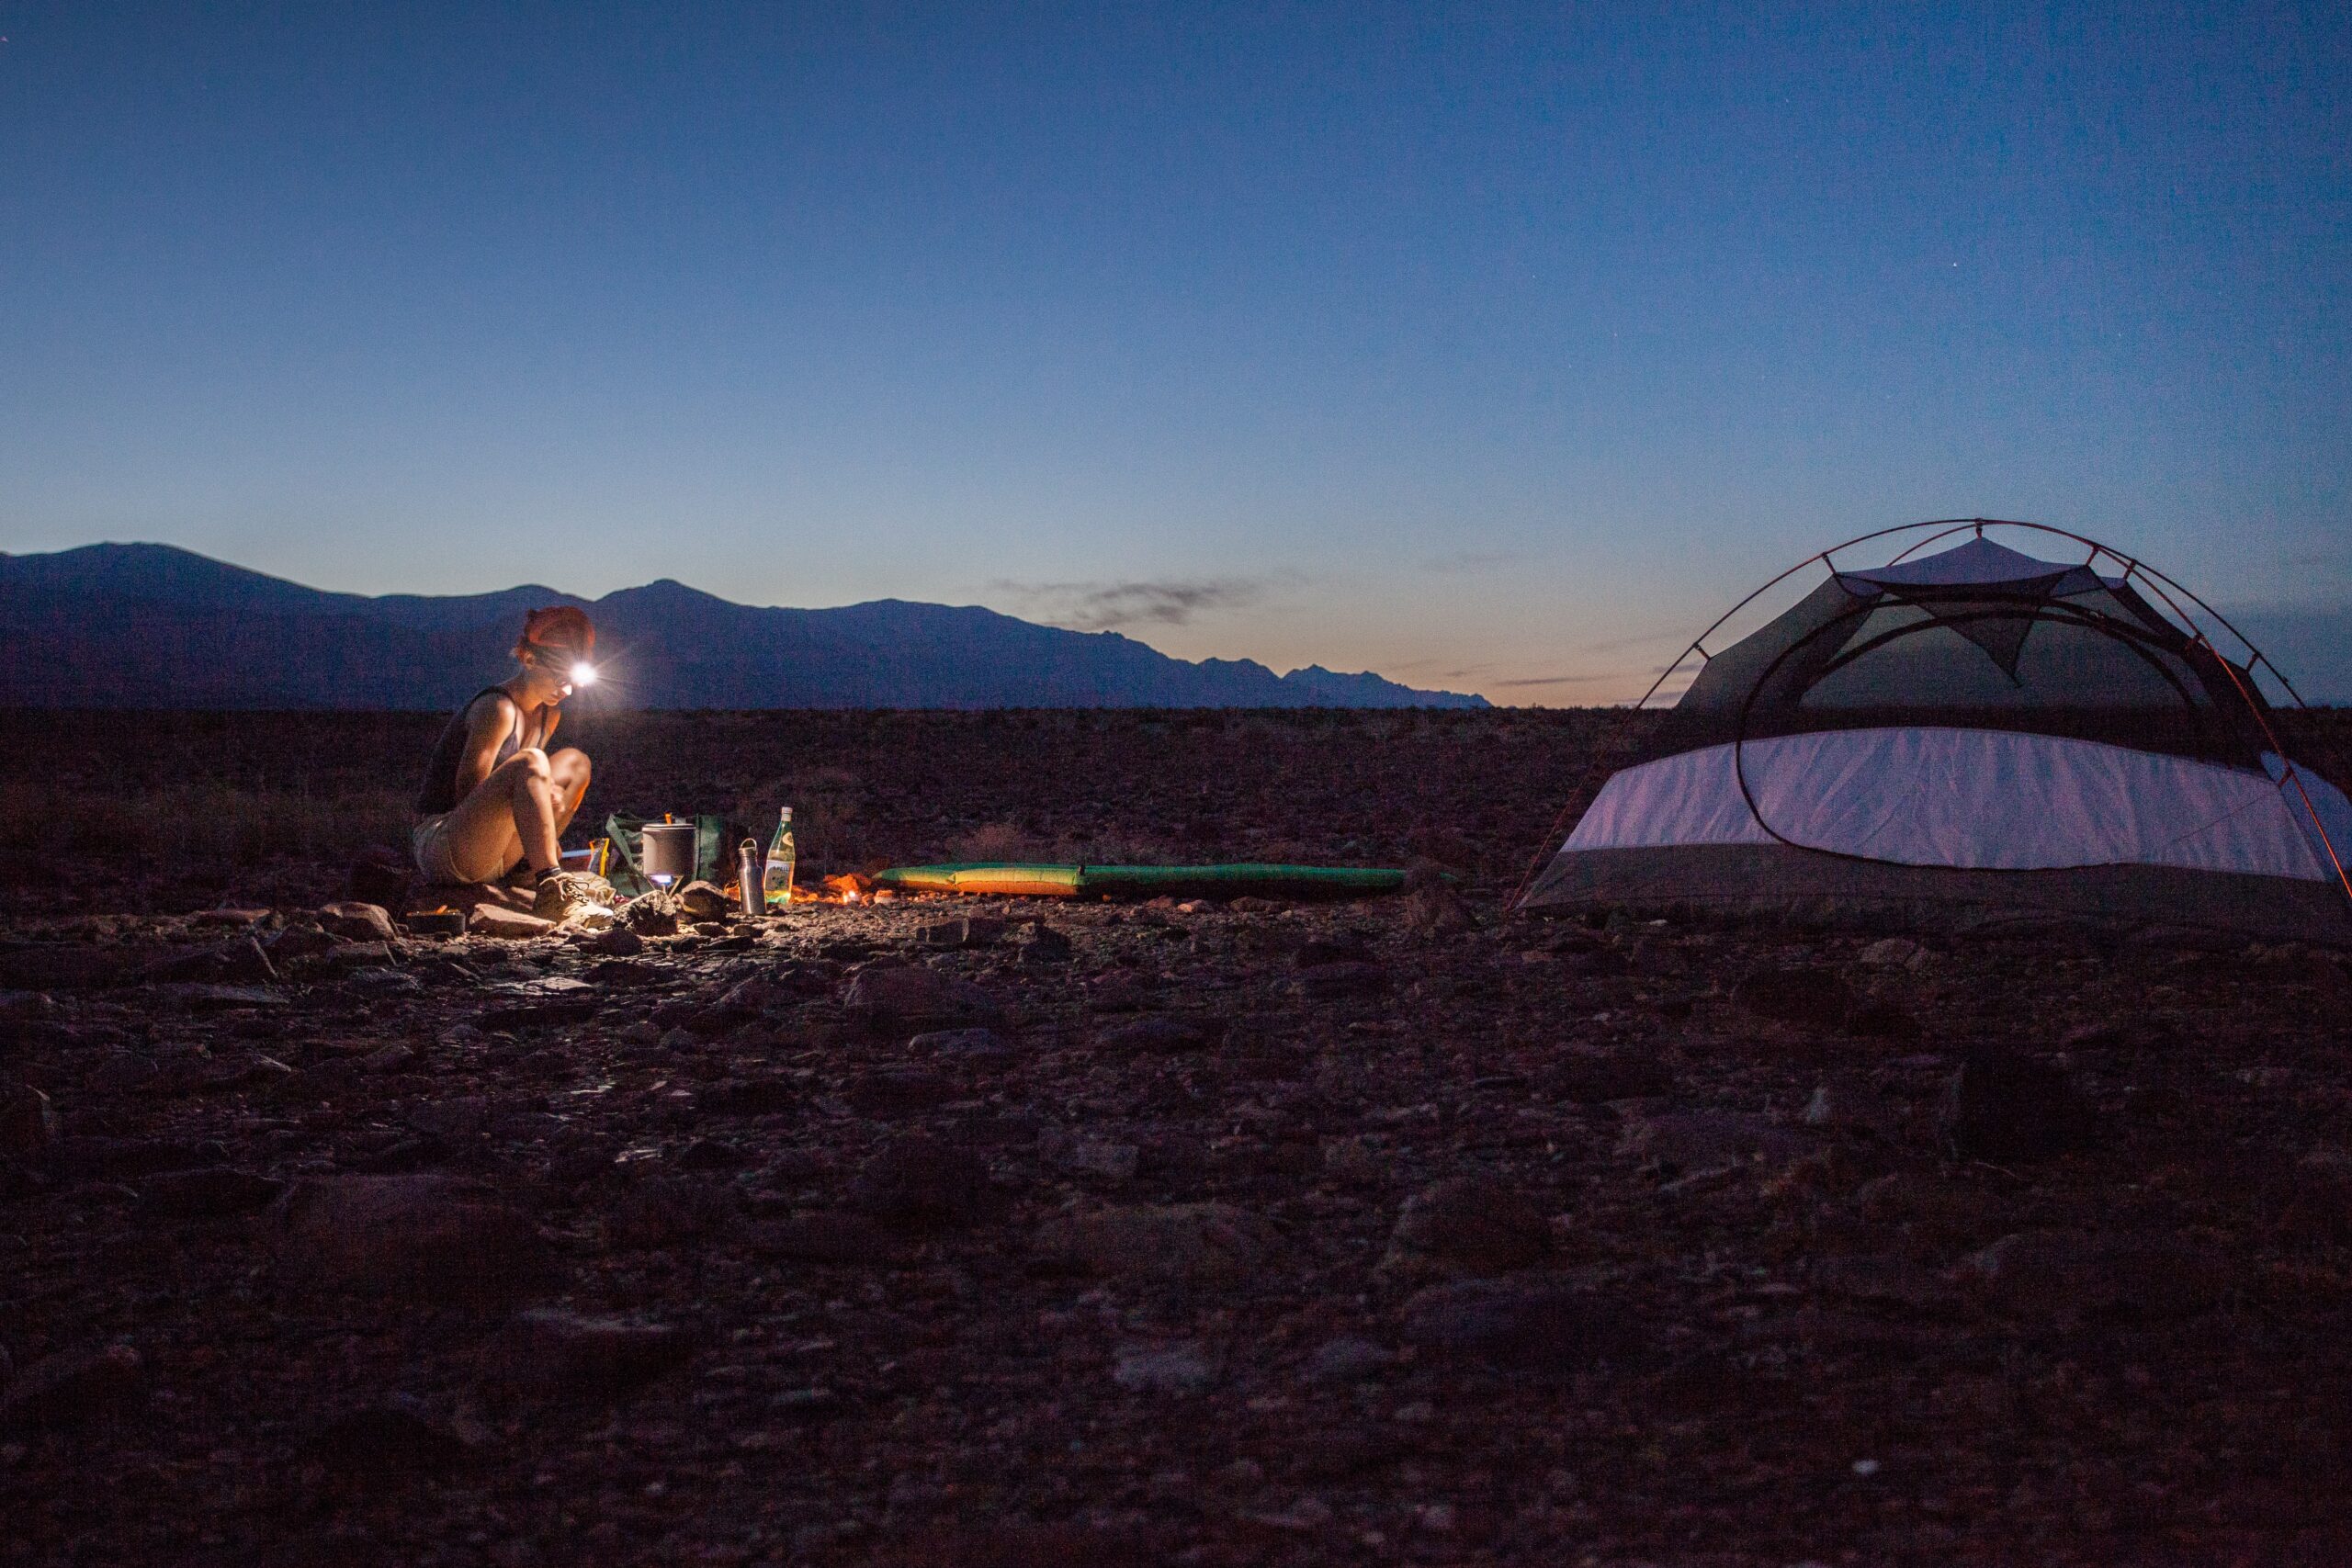 A woman wearing a headlamp and cooking at a campsite at dusk. Photo: Yuriy Rzhemovskiy.